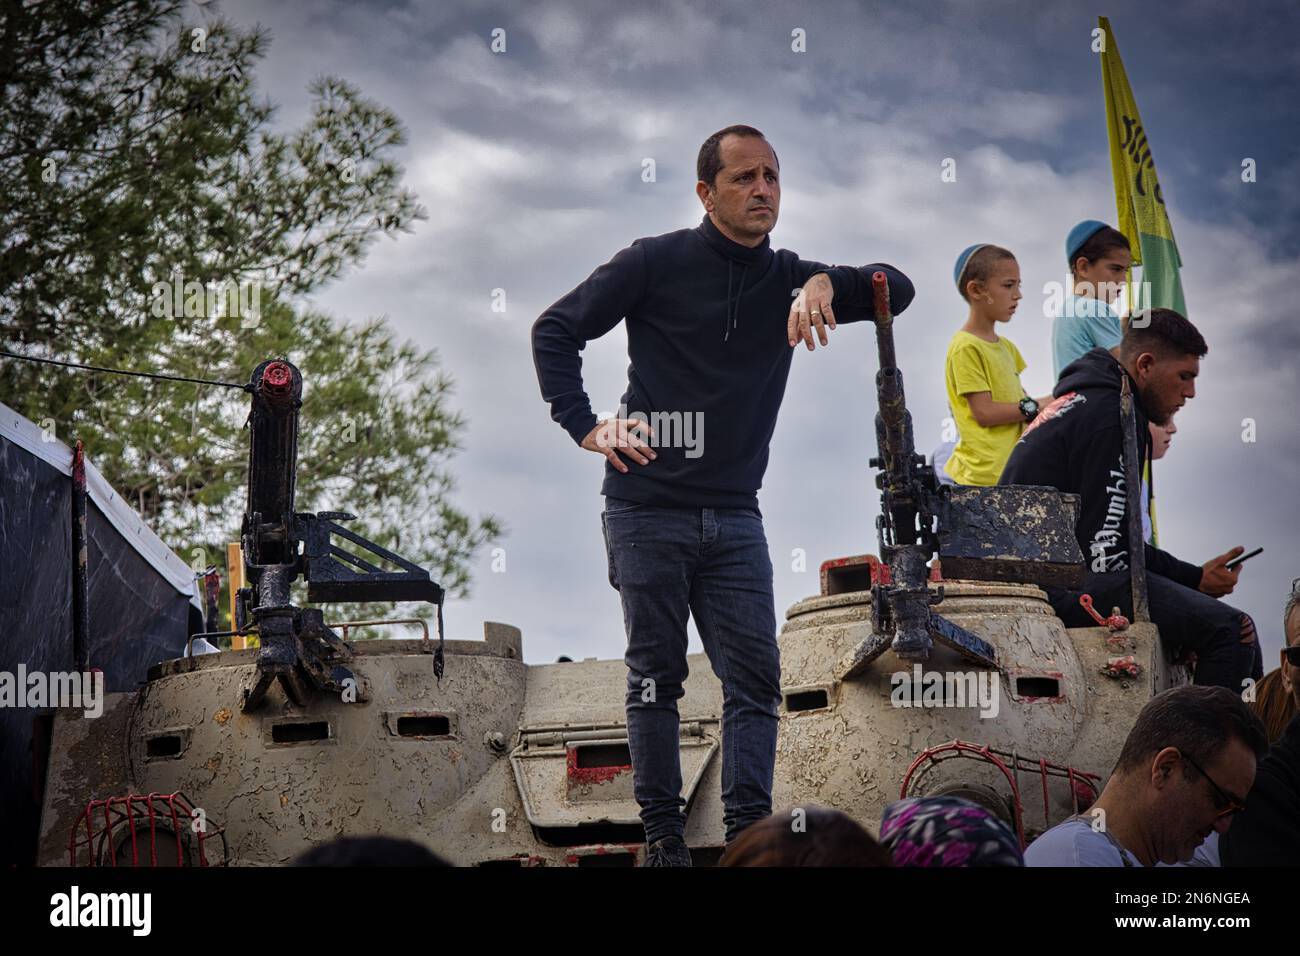 A male standing on top of a tank during Golani soldier ceremony in Israel Stock Photo